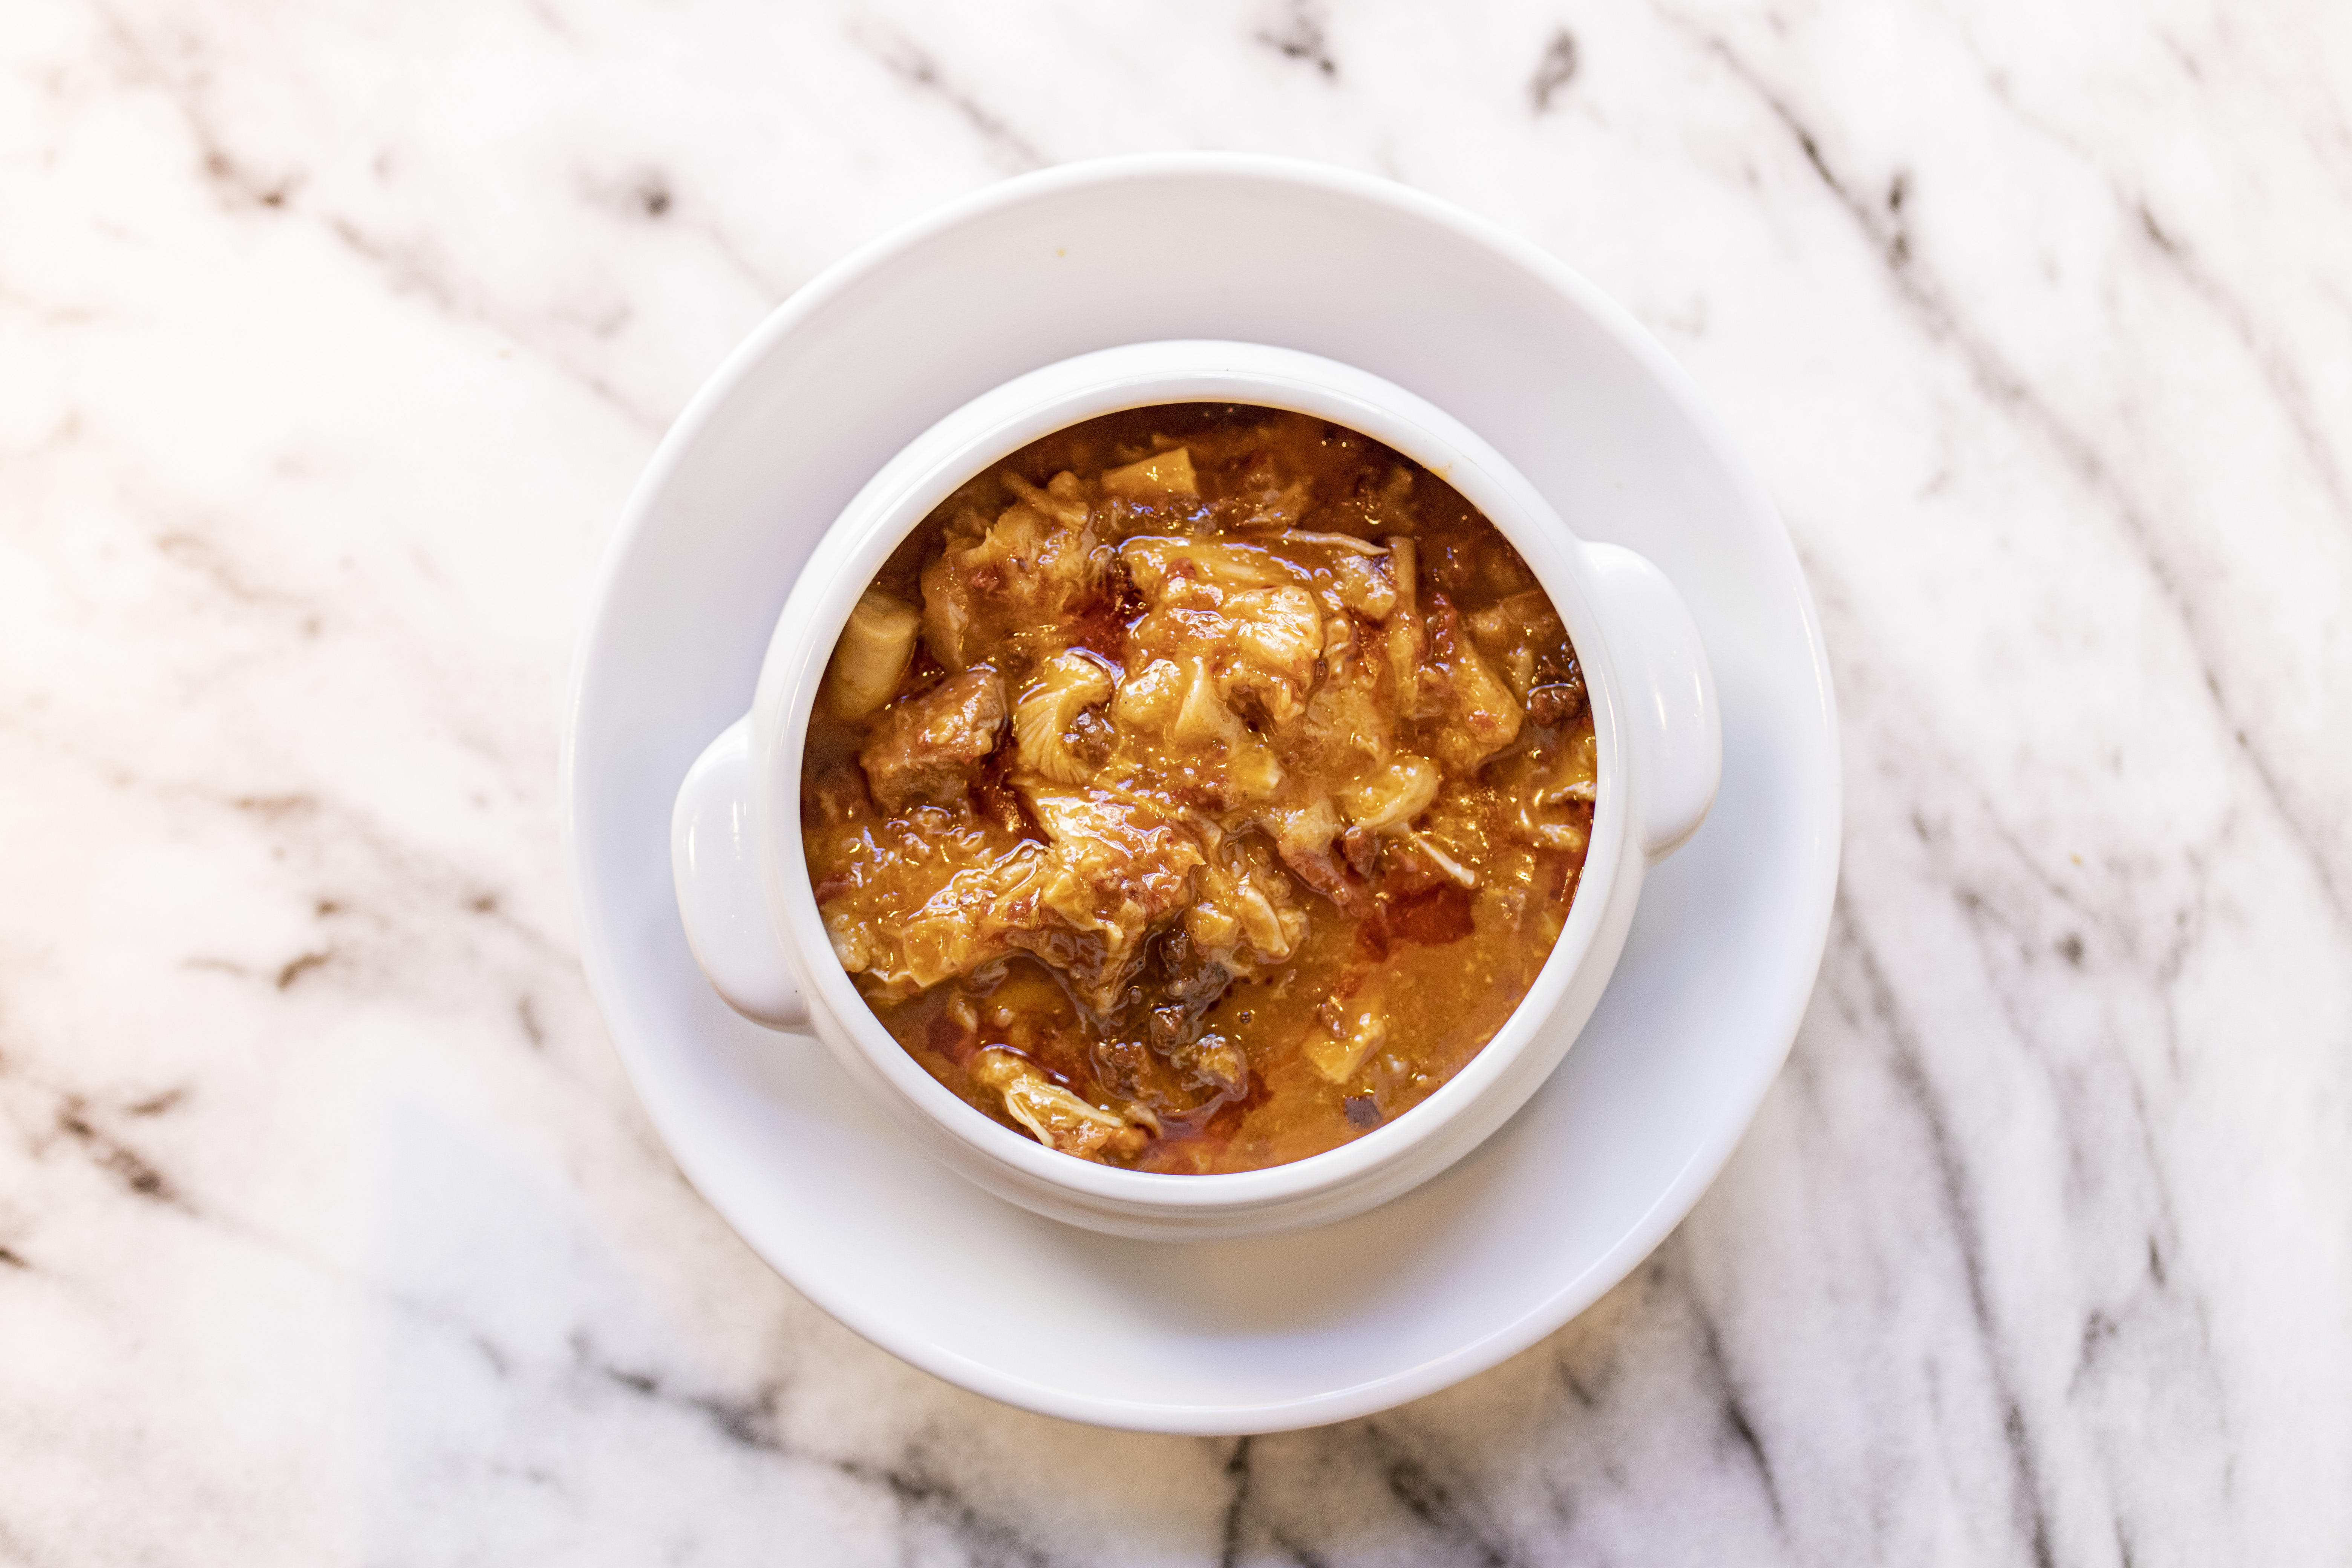 Tripe stew typical from Madrid